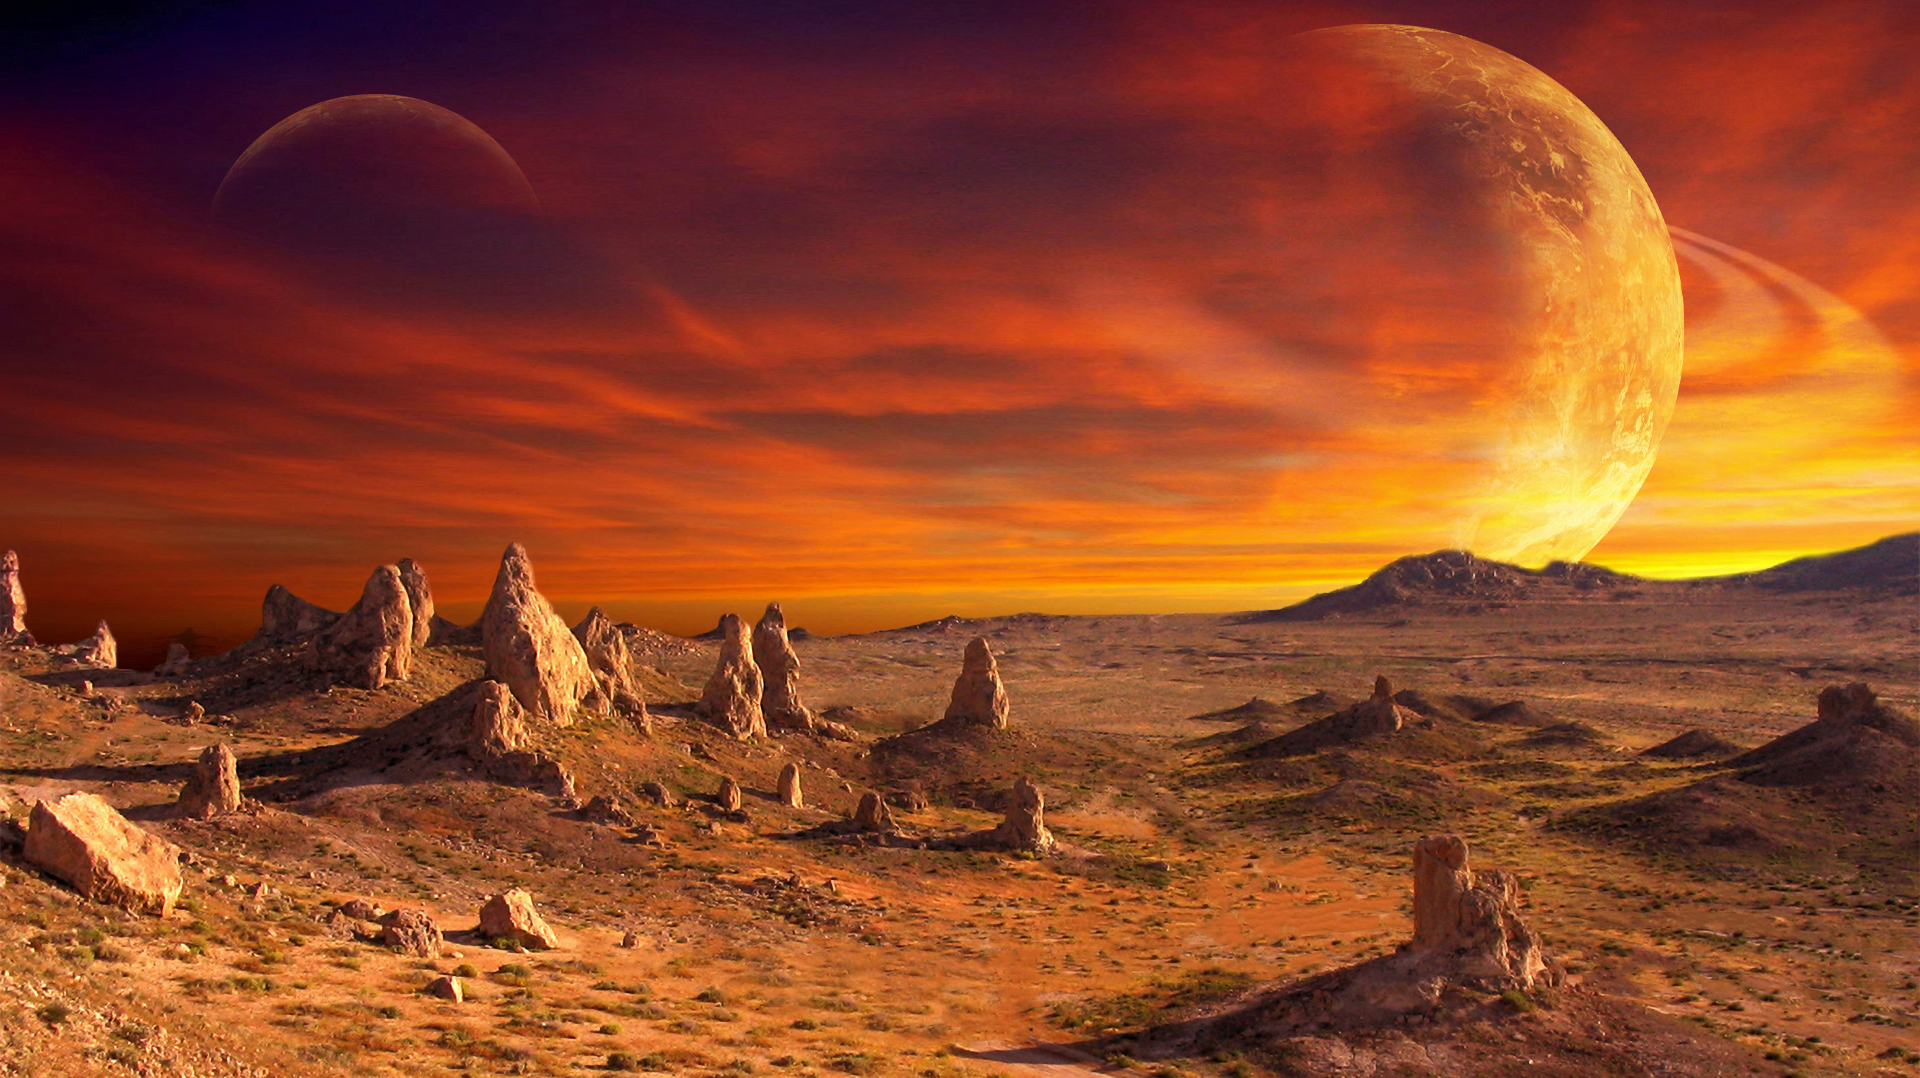 Download Cinematic Mars Landscape View From The Land Hd K Image Coreldraw Design Download